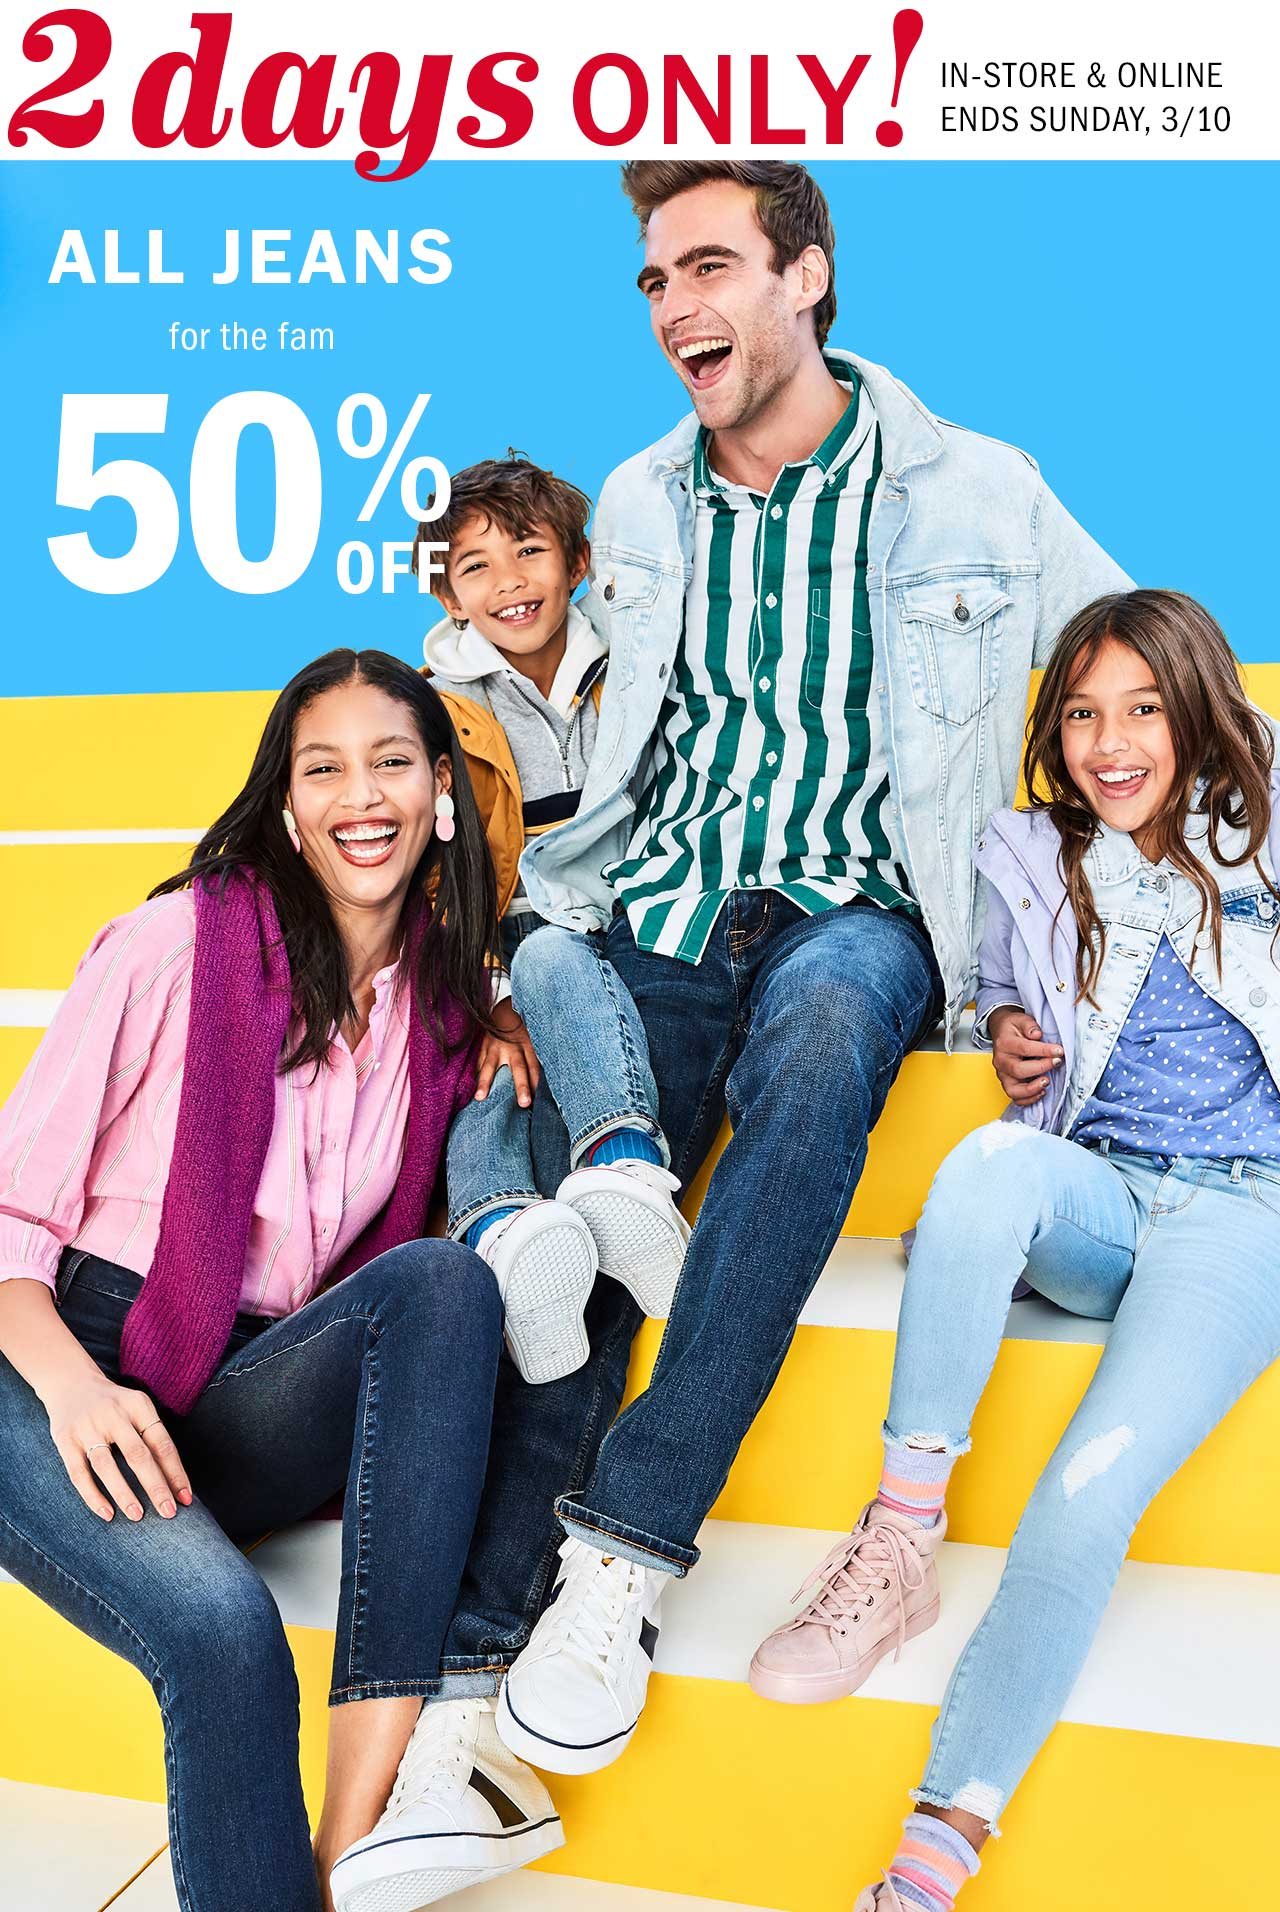 2 days only! All jeans for the fam 50% off